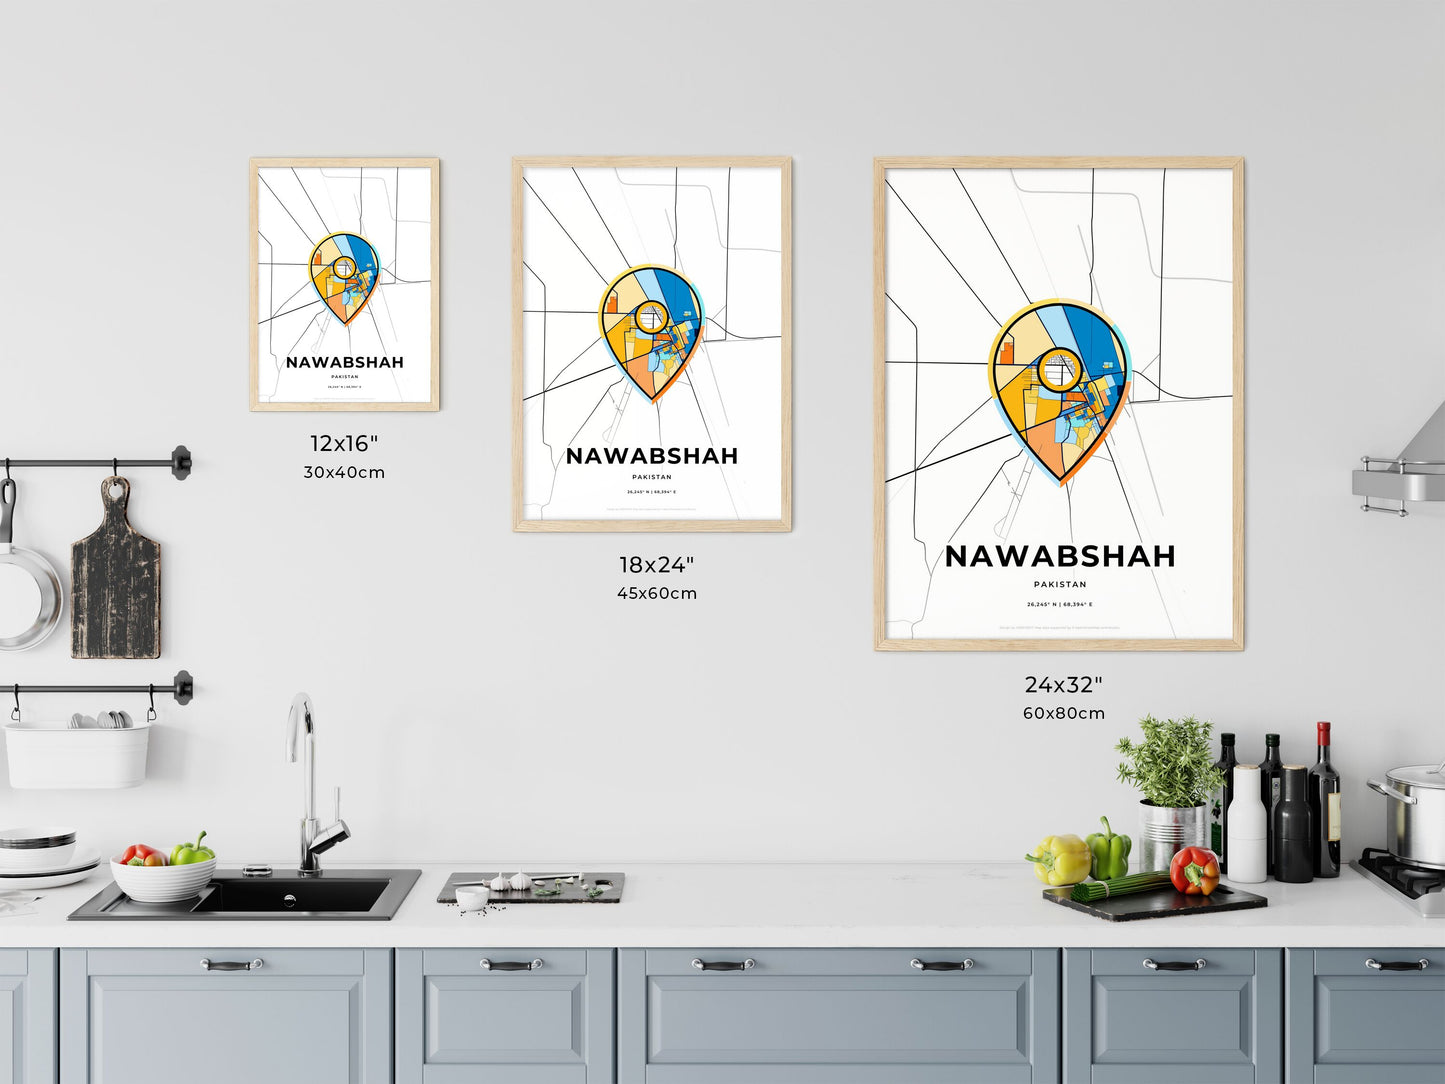 NAWABSHAH PAKISTAN minimal art map with a colorful icon. Where it all began, Couple map gift.